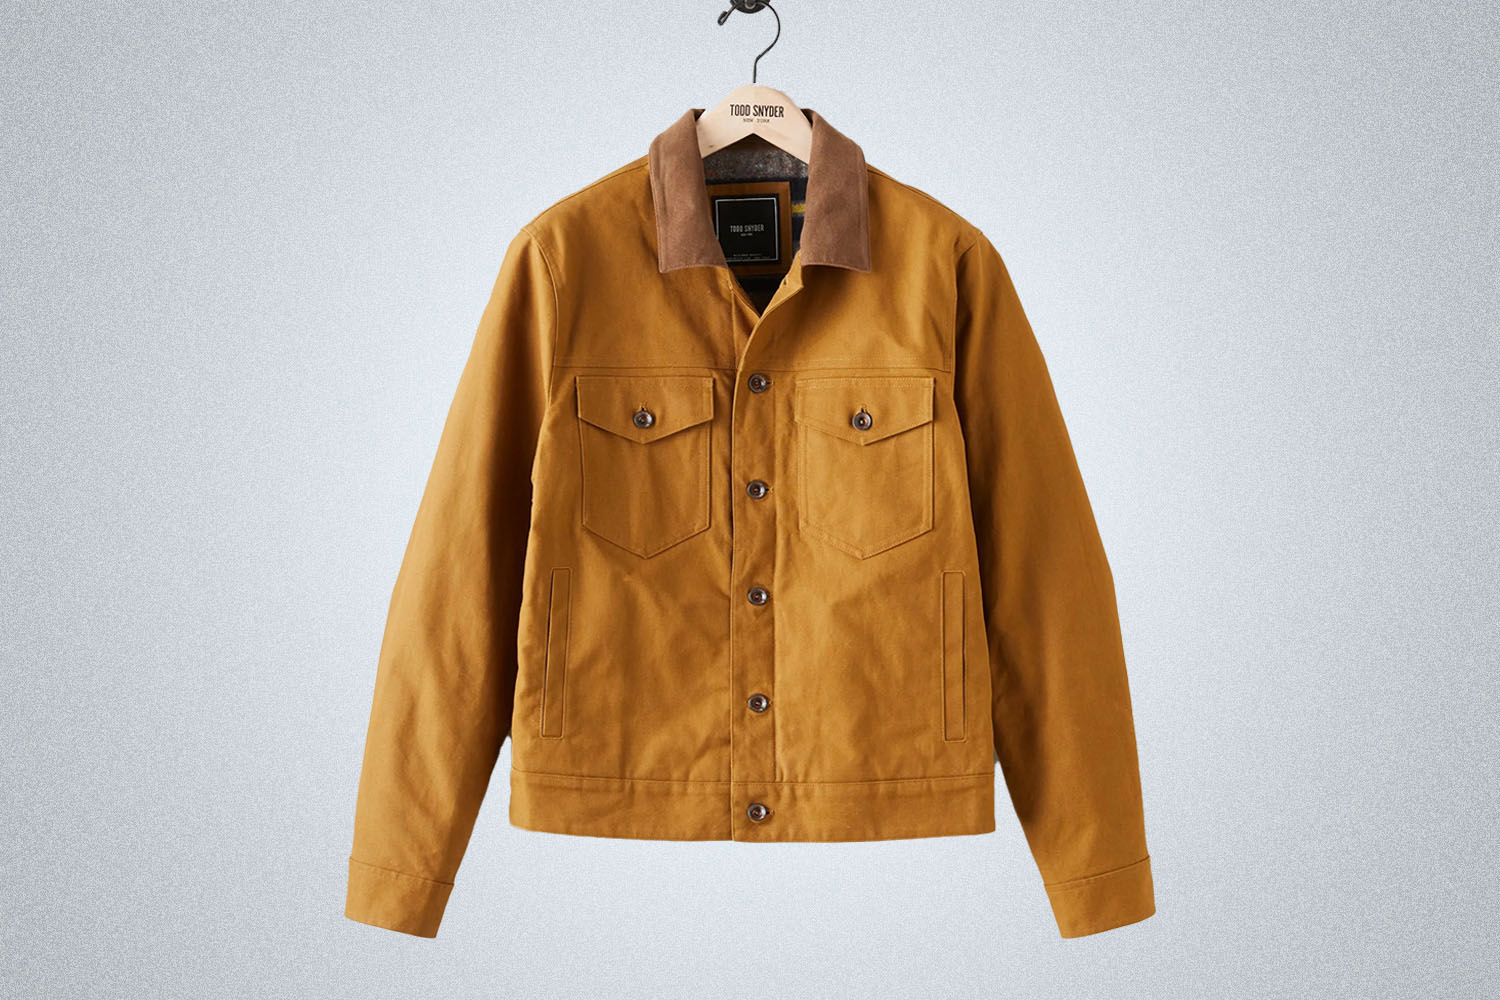 A tan waxed trucker jacket from Todd Snyder on a grey background